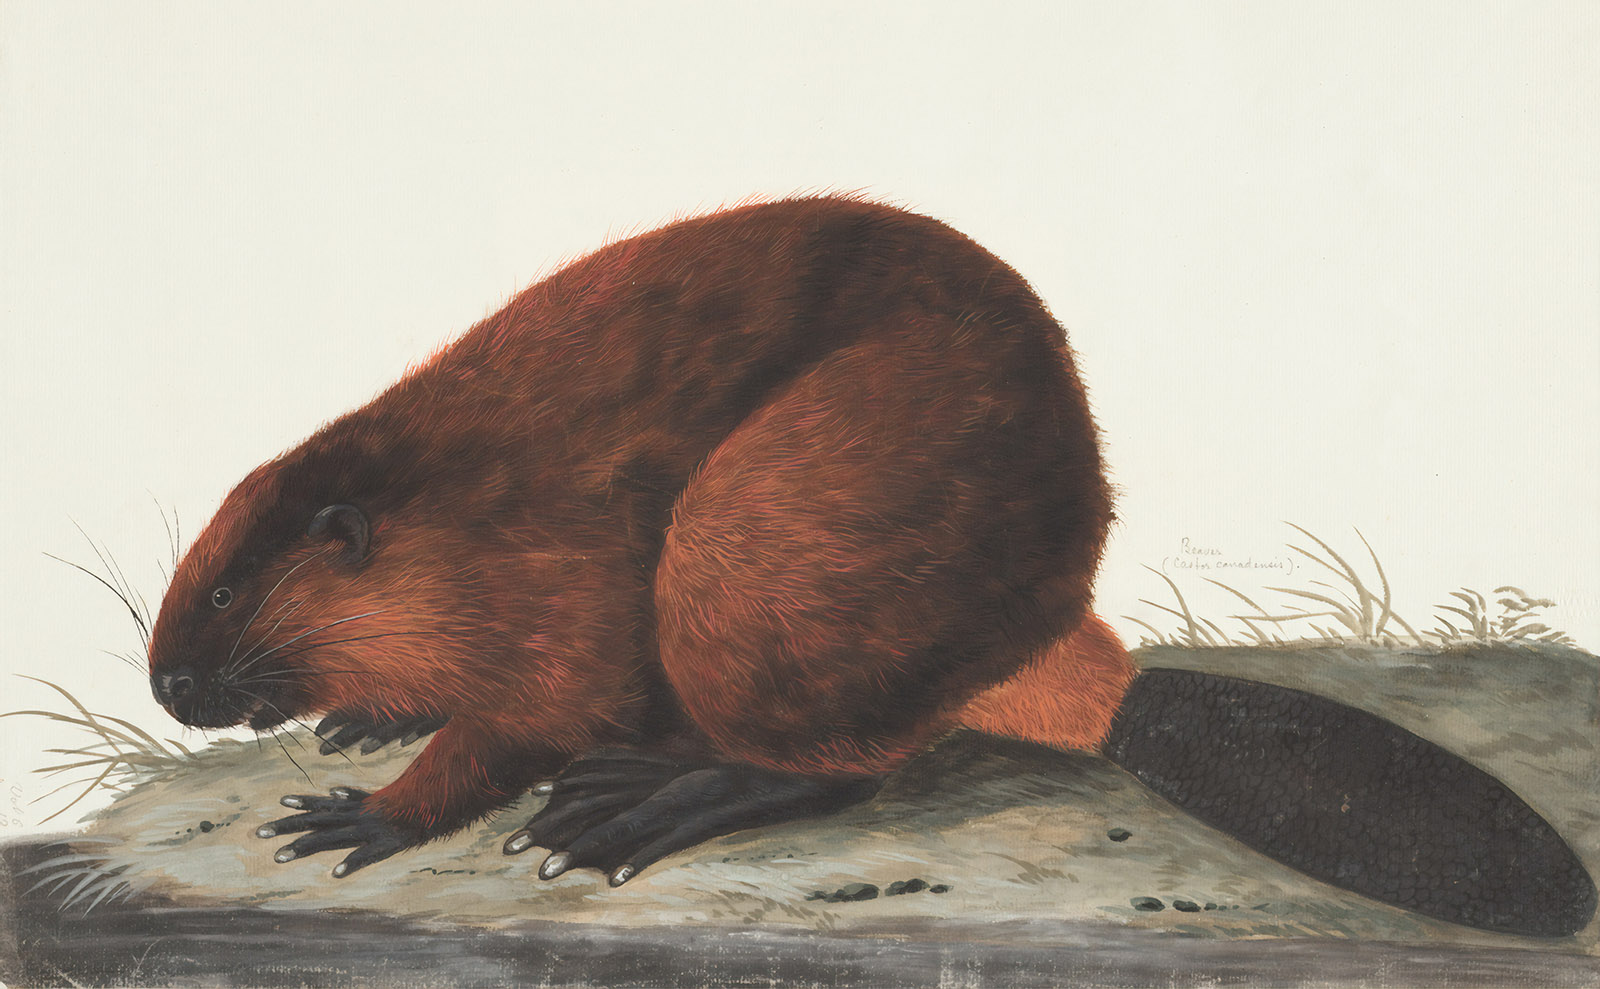 illustration of a brown beaver sitting on a grassy river bank